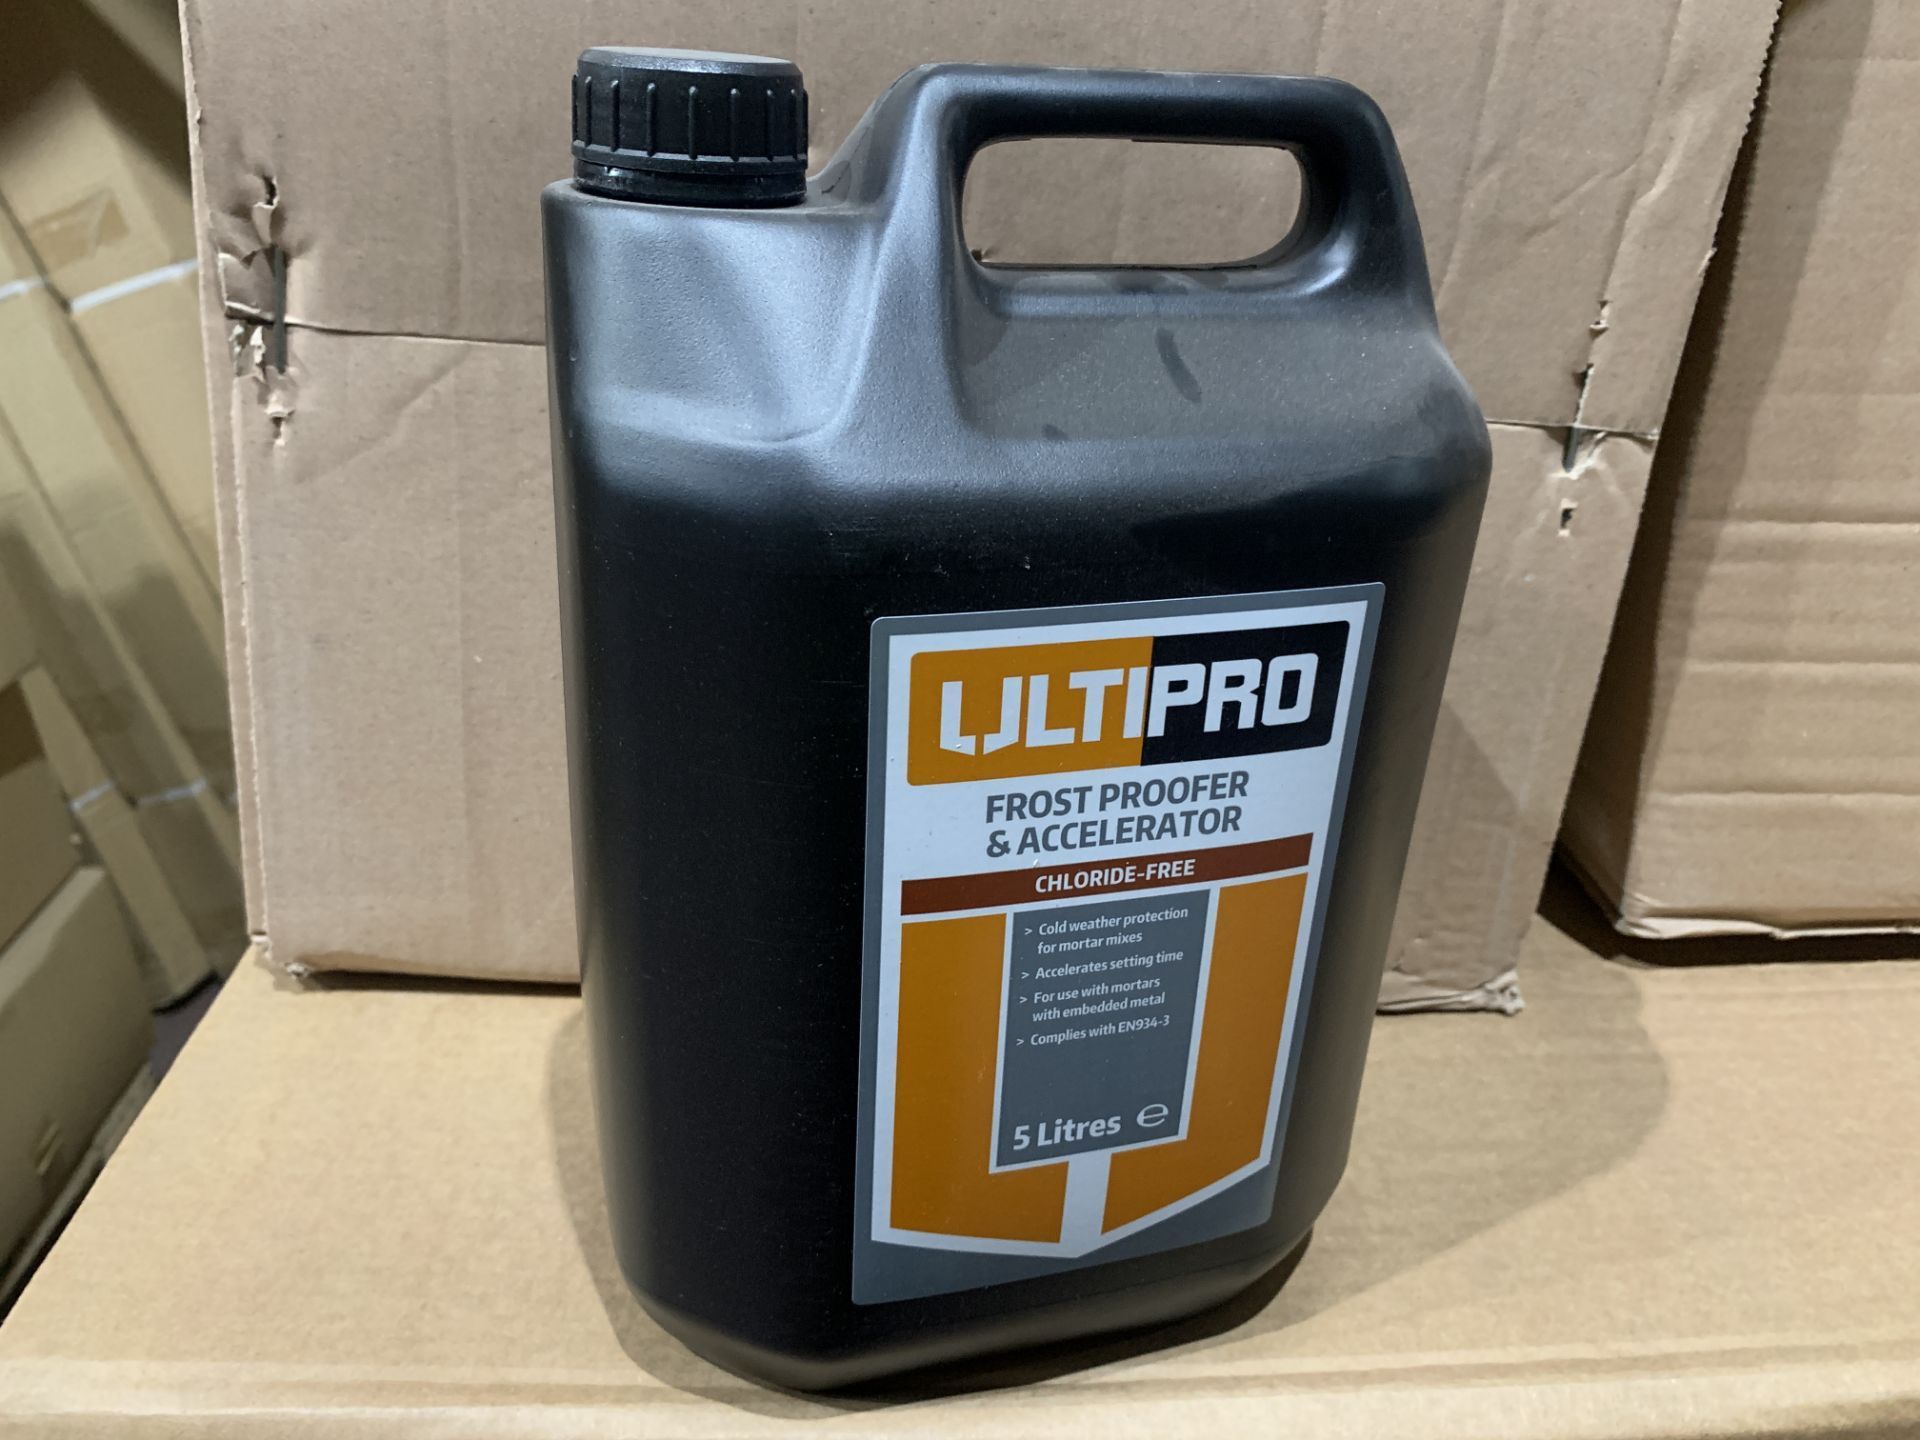 PALLET OF 96 X NEW 5L TUBS OF ULTIPRO FROST PROOFER & ACCELERATOR - CHLORIDE FREE. RRP £12 EACH